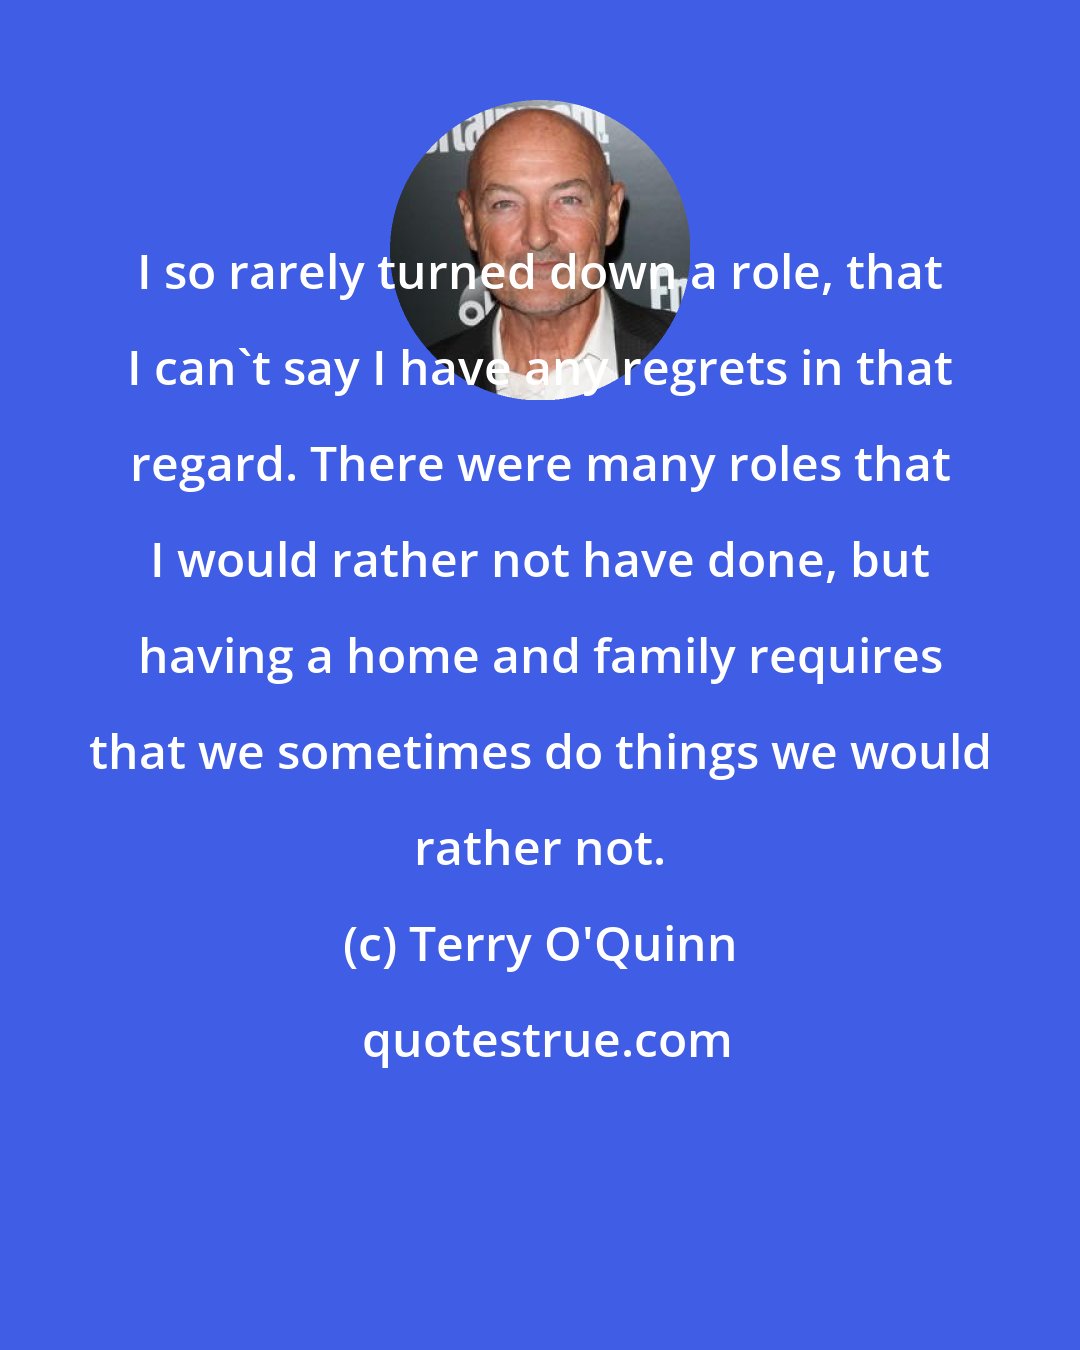 Terry O'Quinn: I so rarely turned down a role, that I can't say I have any regrets in that regard. There were many roles that I would rather not have done, but having a home and family requires that we sometimes do things we would rather not.